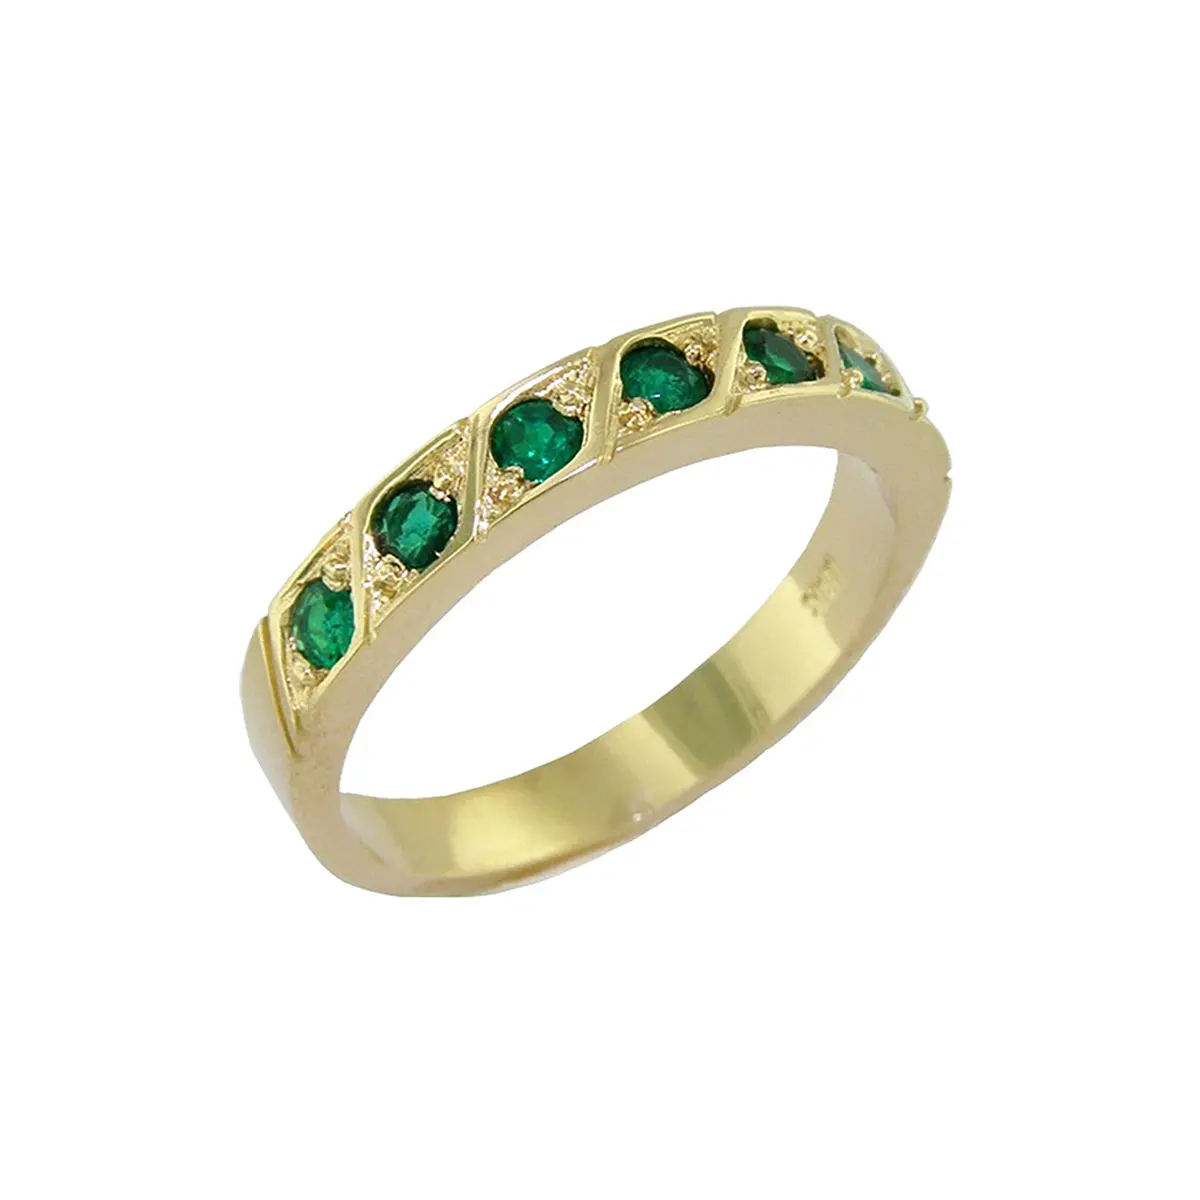 antique-style-round-emerald-wedding-band-in-18k-yellow-gold